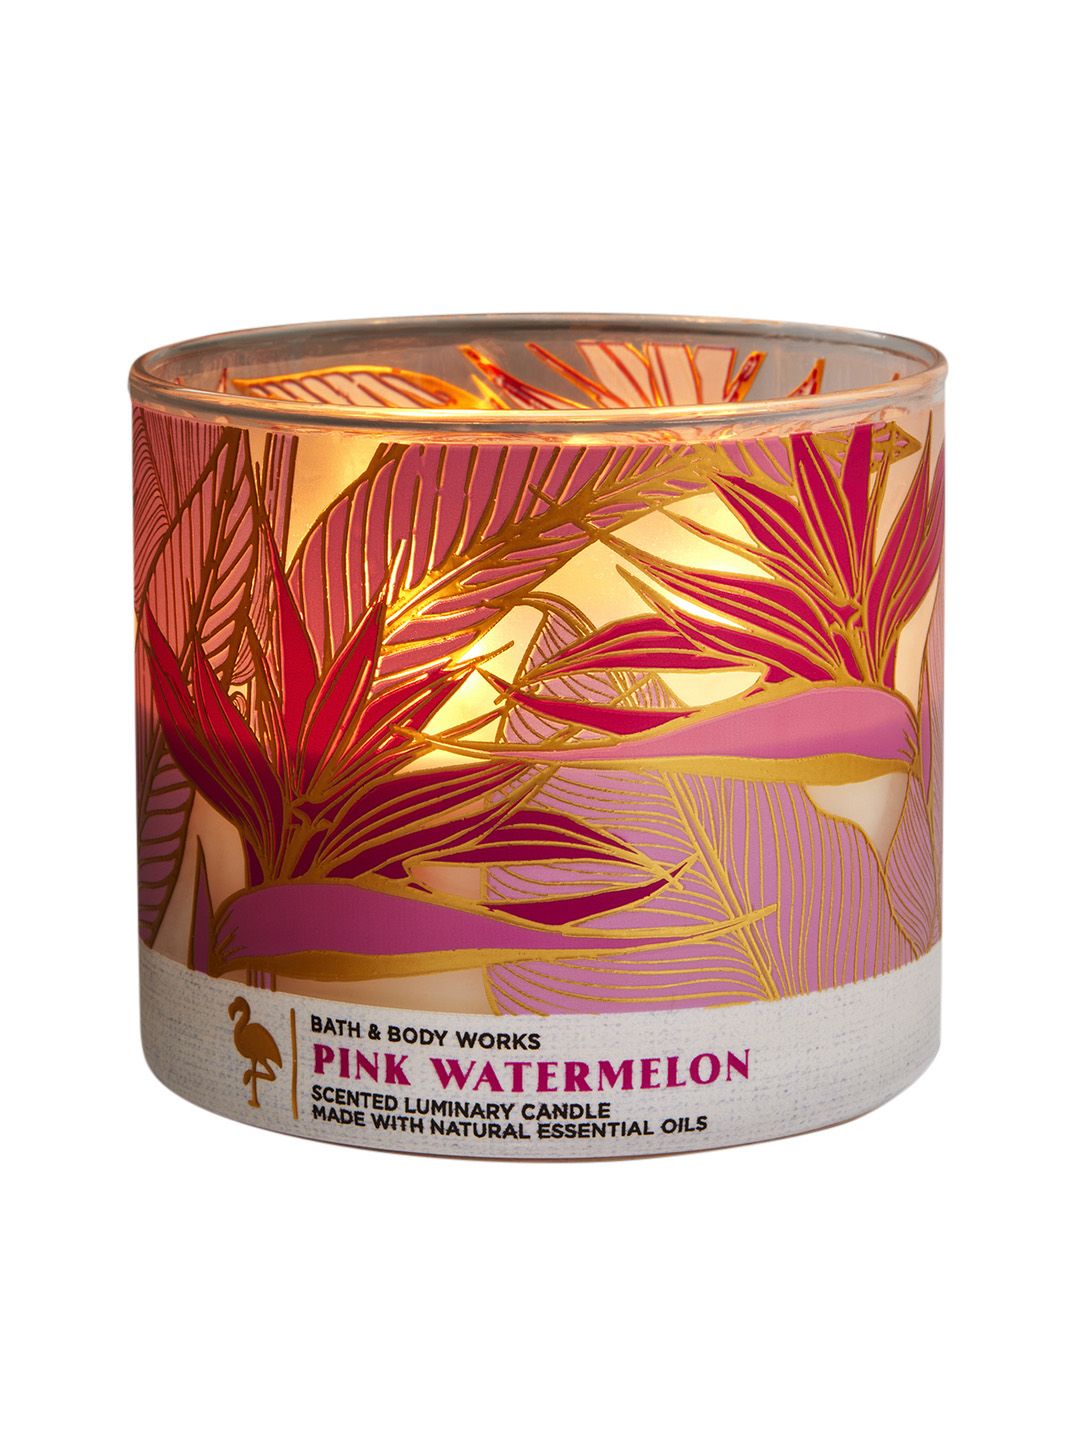 Bath & Body Works Pink Watermelon 3-Wick Candle - 411 g Price in India